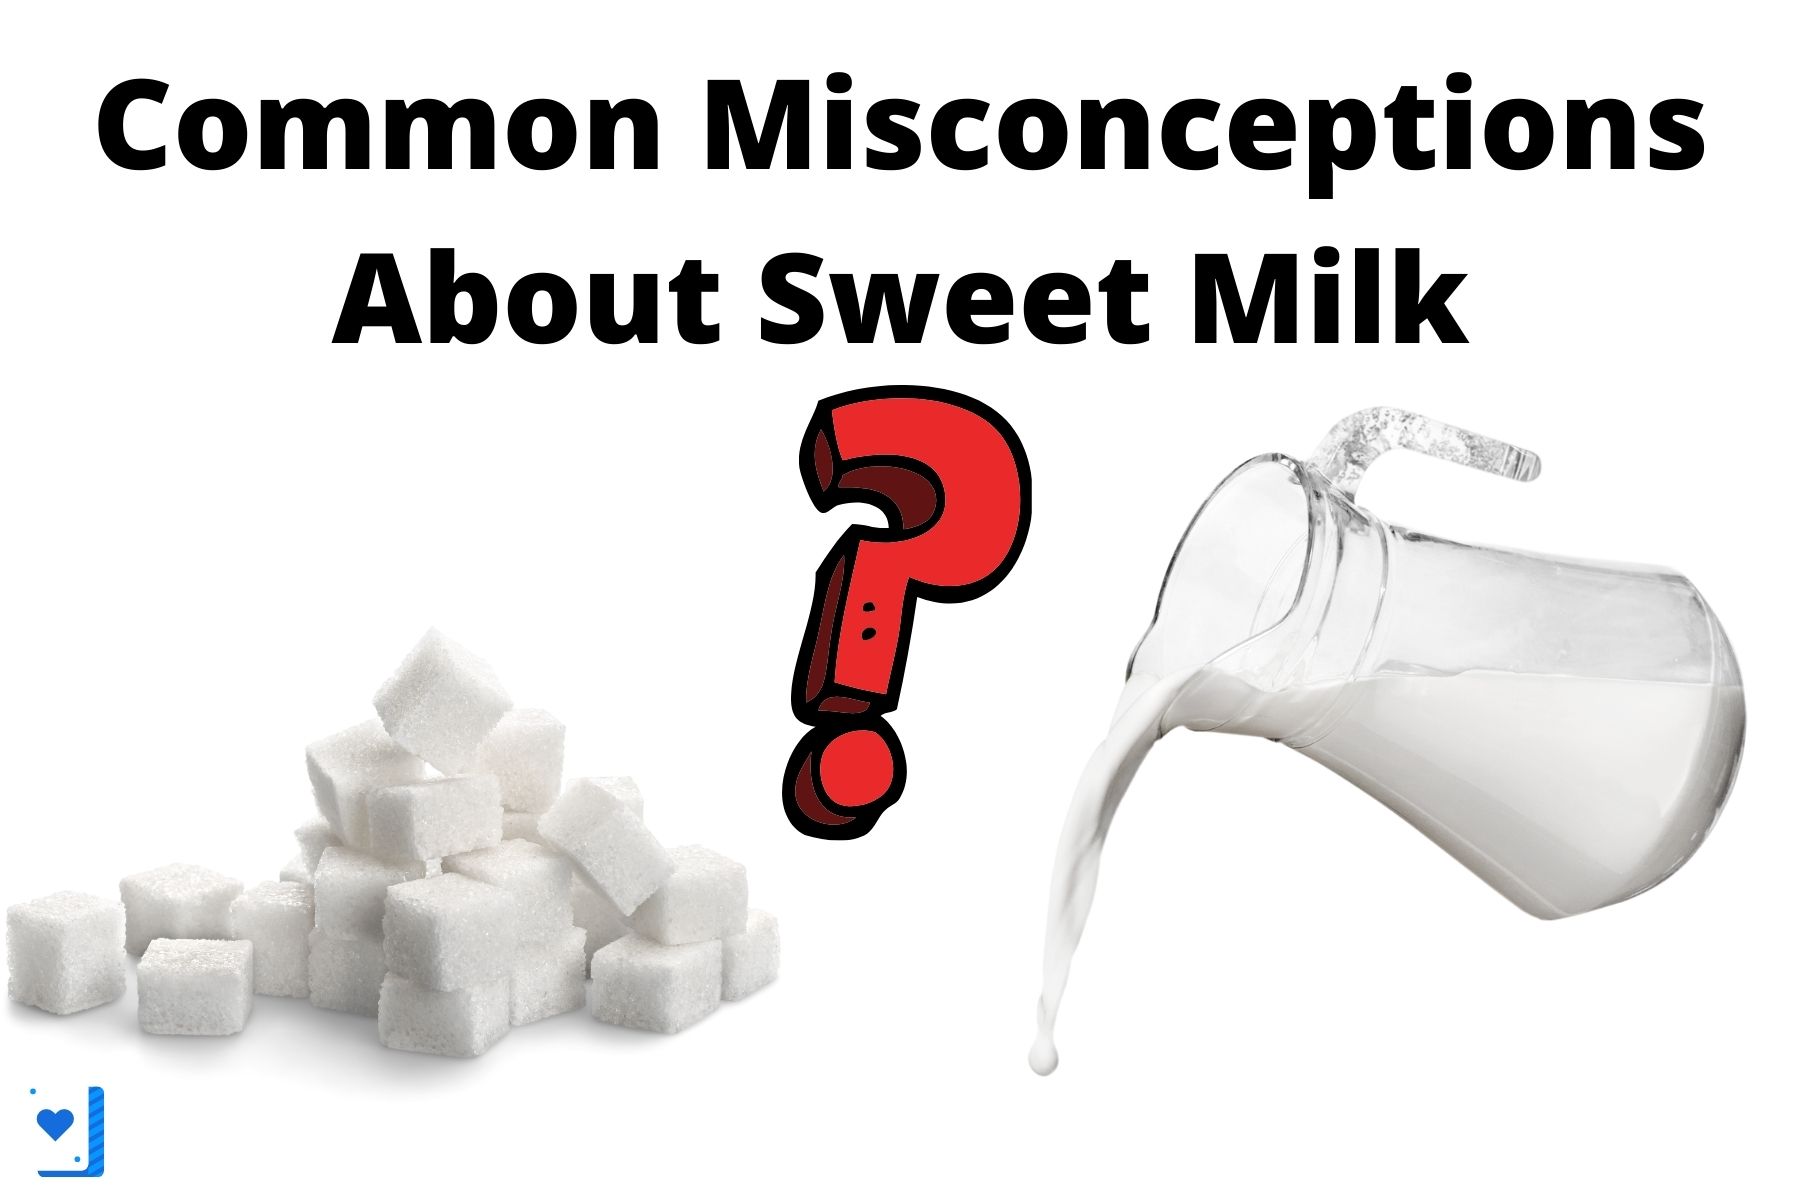 Common misconceptions about sweet milk